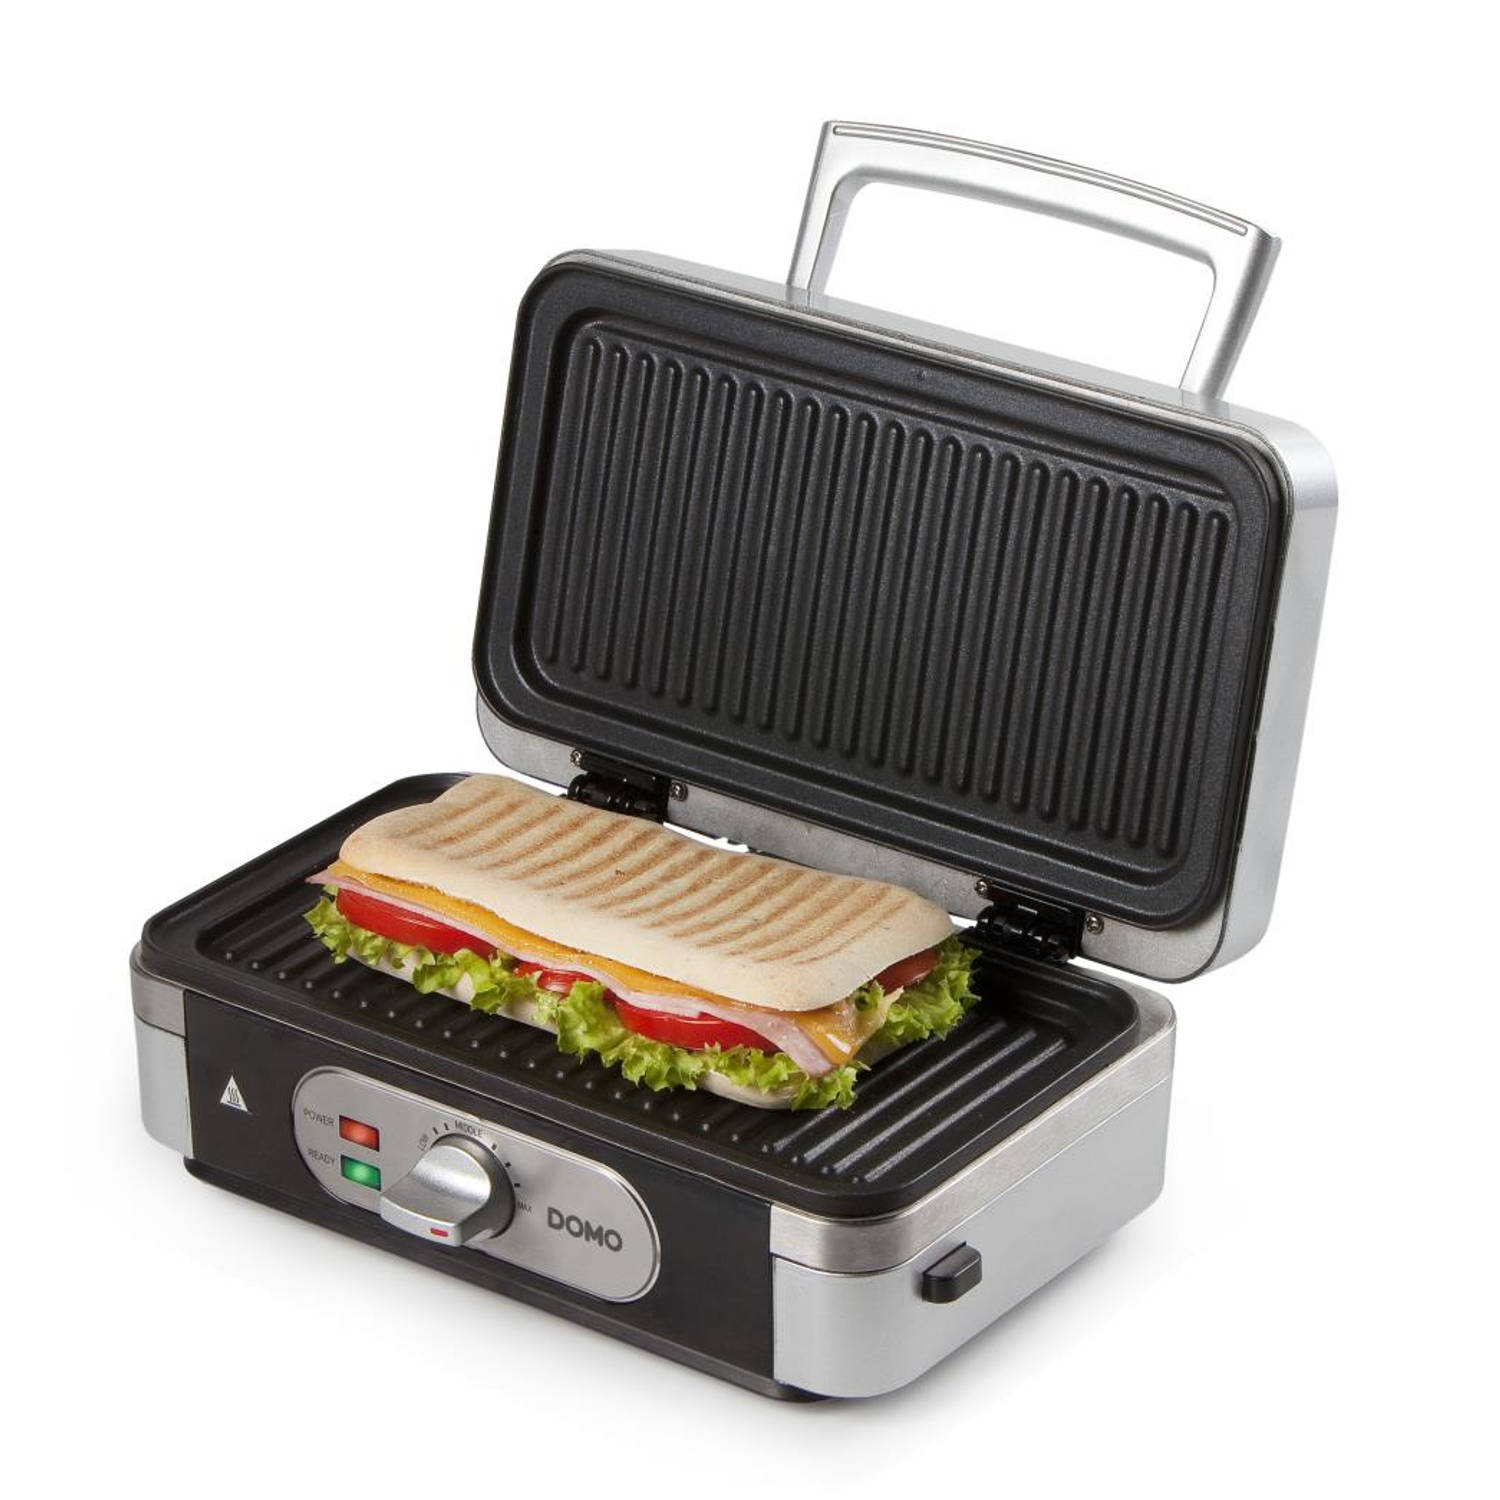 Domo Do9136c - Snackmaker 3-in-1 - Tosti/croque - Grill/panini - Wafel - Zilver aanbieding